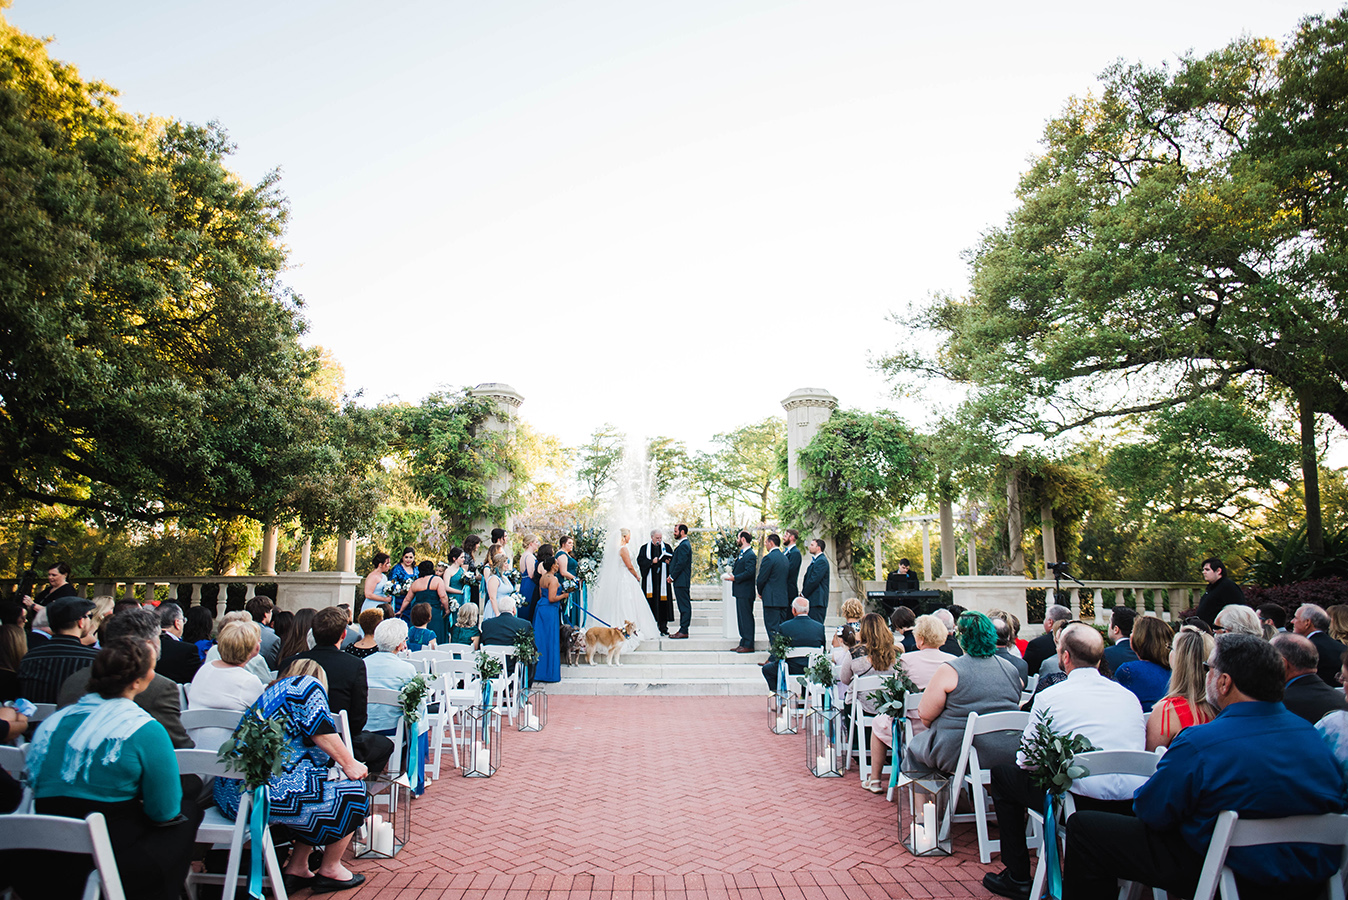 “We did a laying on of hands at the end of the ceremony,” shares Kate. “It’s a special prayer with everyone showing support by connecting hands on shoulders. All of our friends and family were there and it had us feeling so supported and special.”